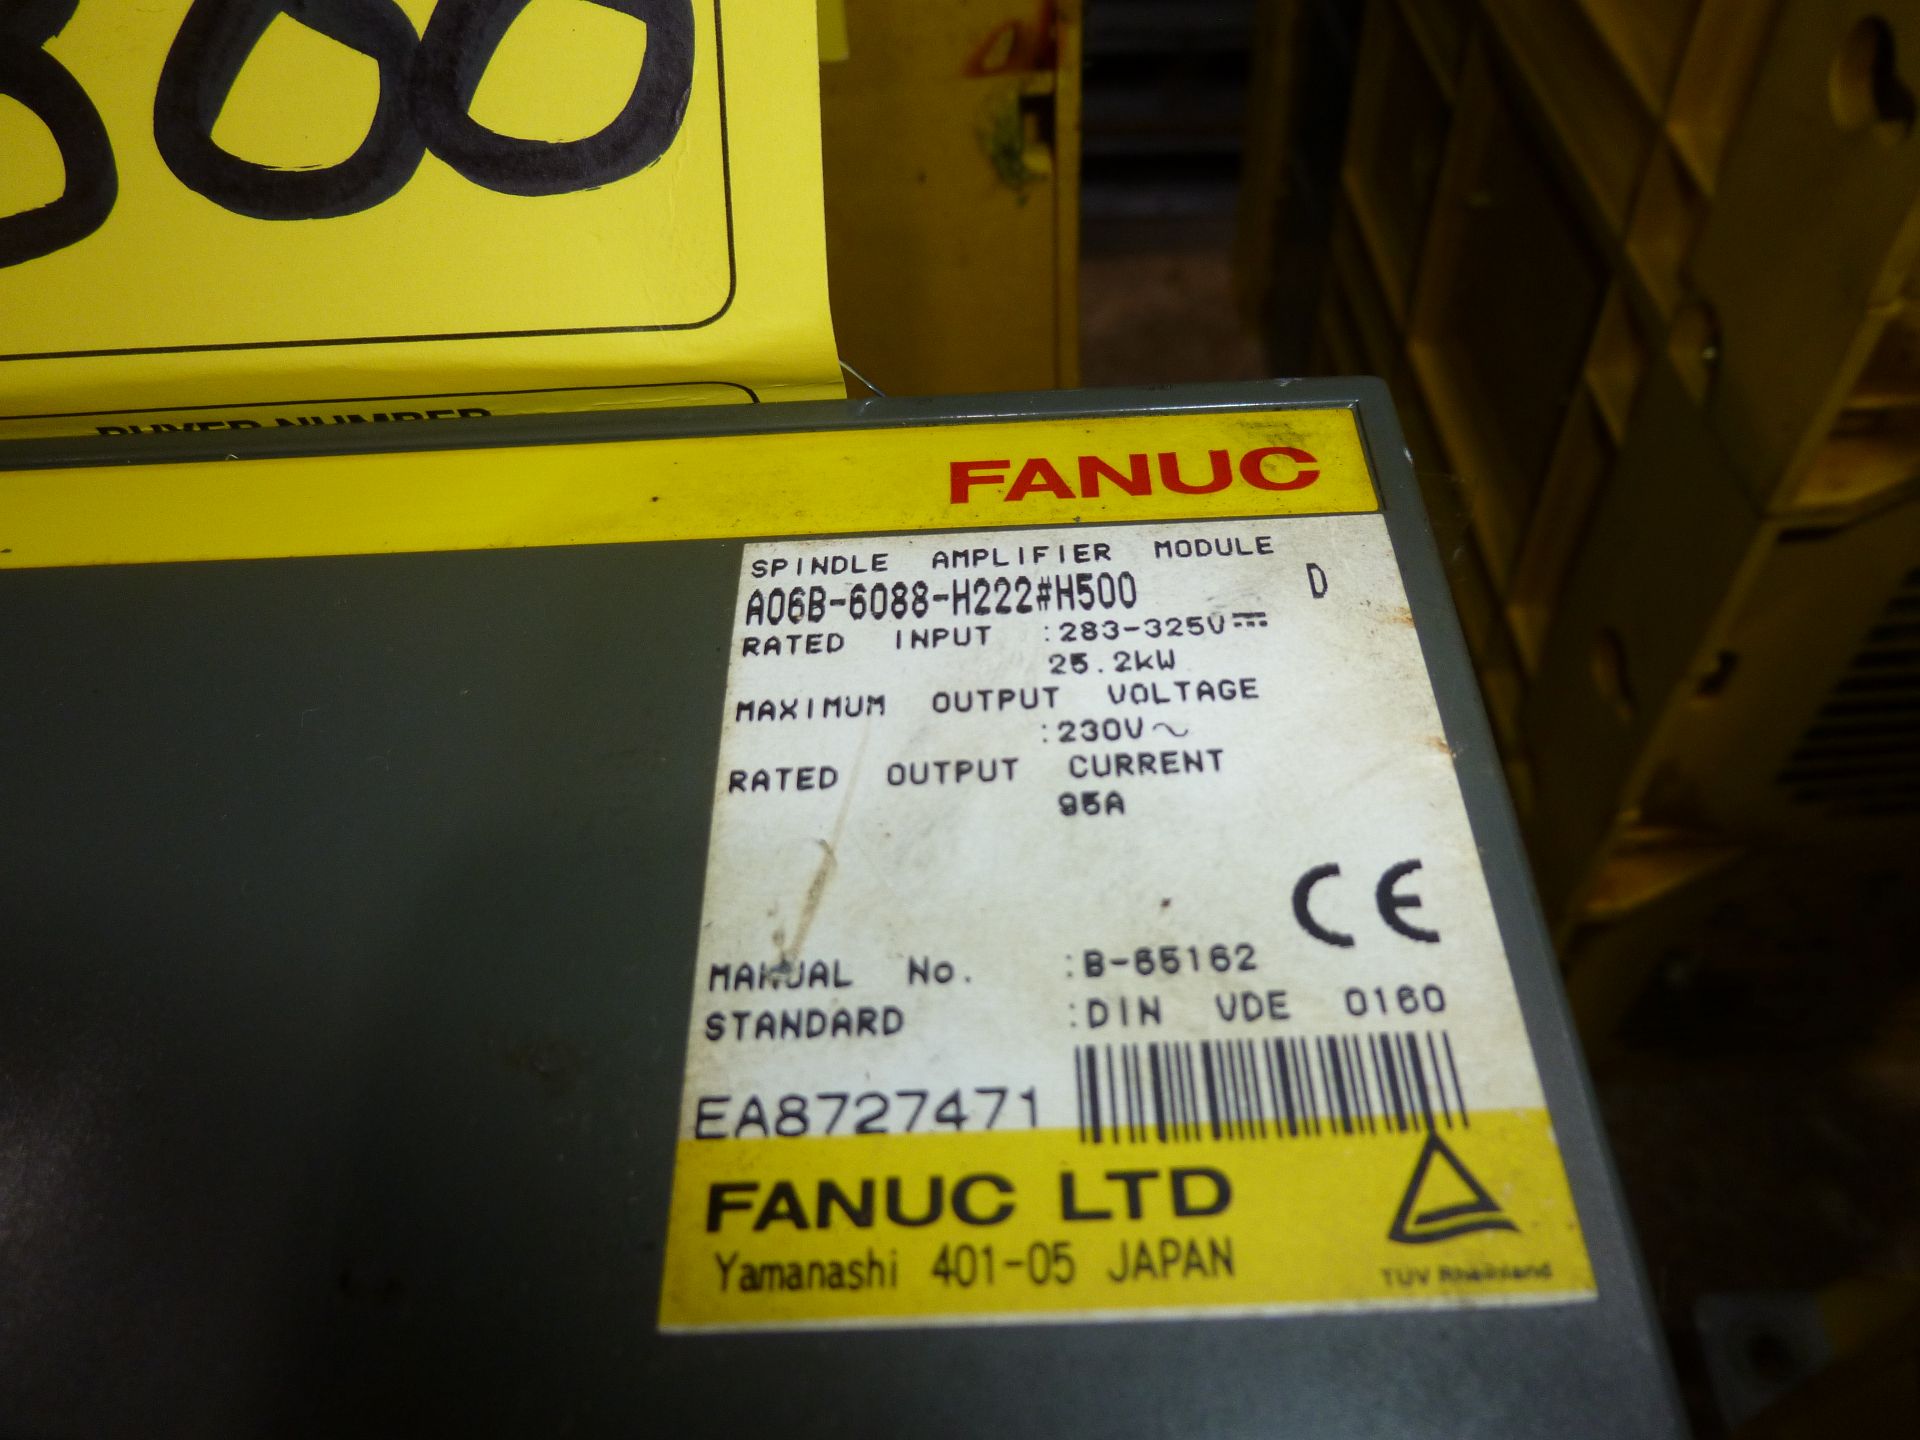 Fanuc spindle amplifier module modle A06B-6088-H222 #H500, as always with Brolyn LLC auctions, all - Image 2 of 2